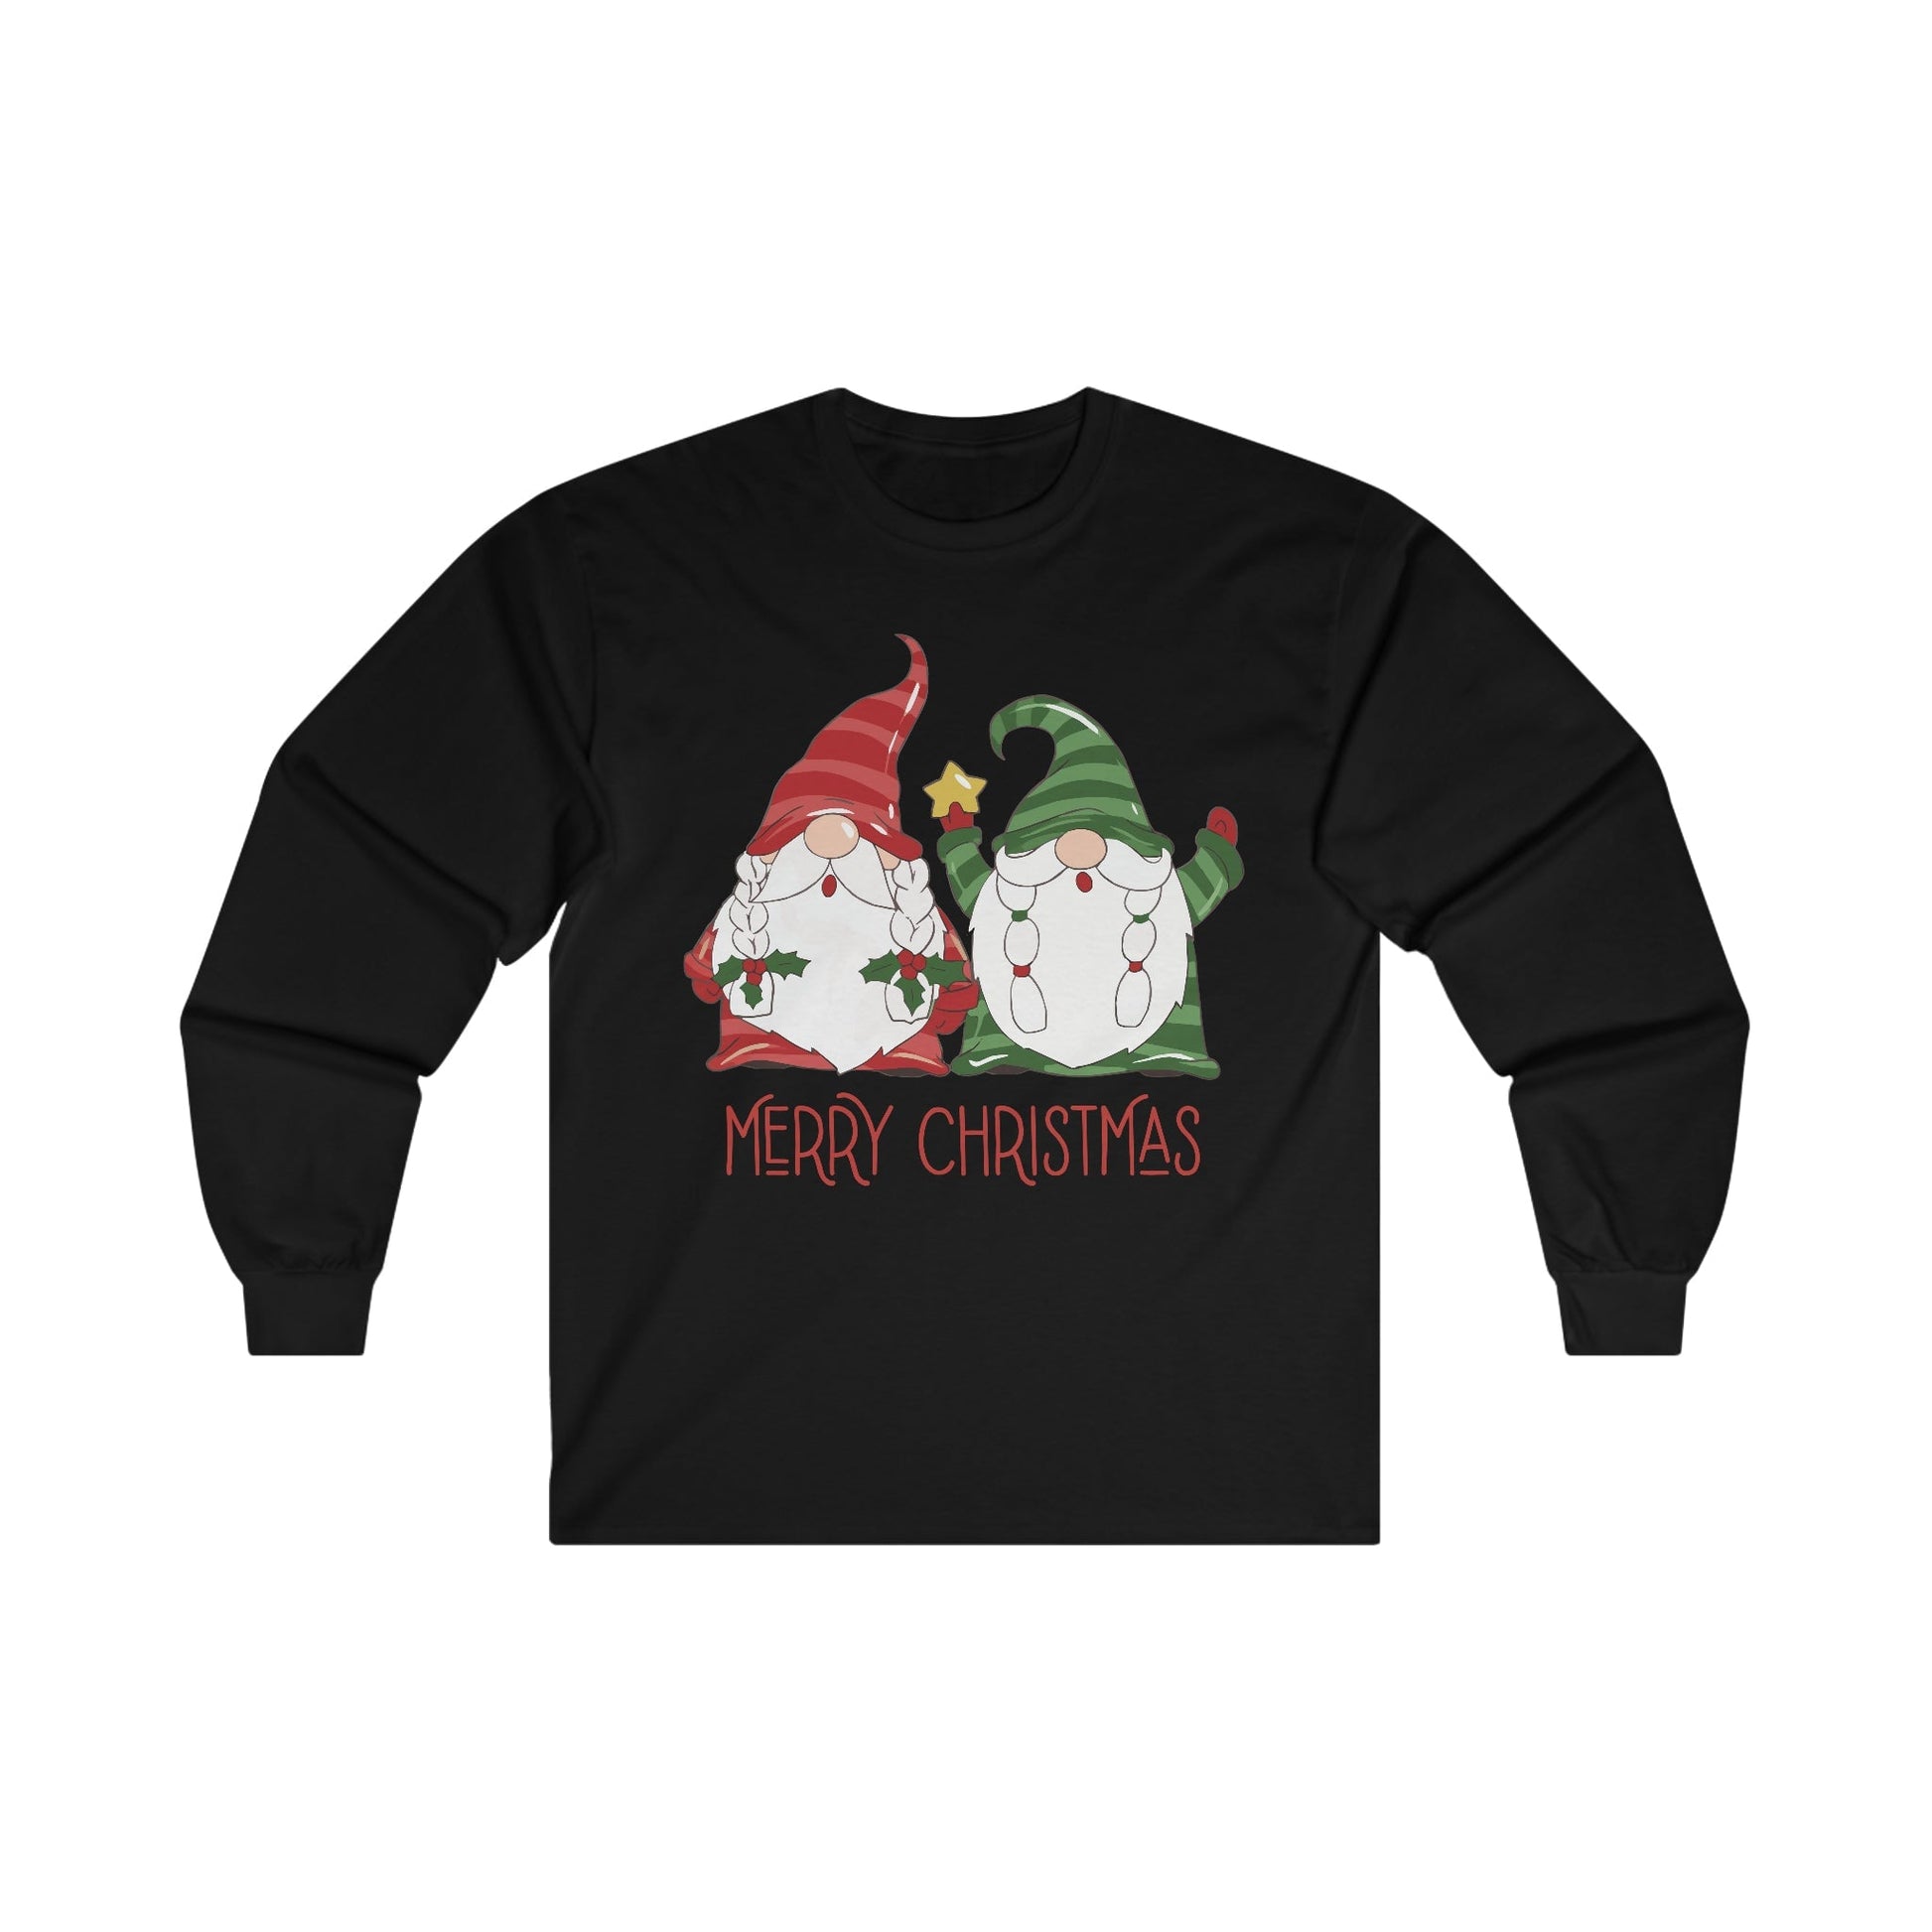 Christmas Long Sleeve T-Shirt - Gnome Merry Christmas - Cute Christmas Shirts - Youth and Adult Christmas Long Sleeve TShirts Long Sleeve T-Shirts Graphic Avenue Black Adult Small 